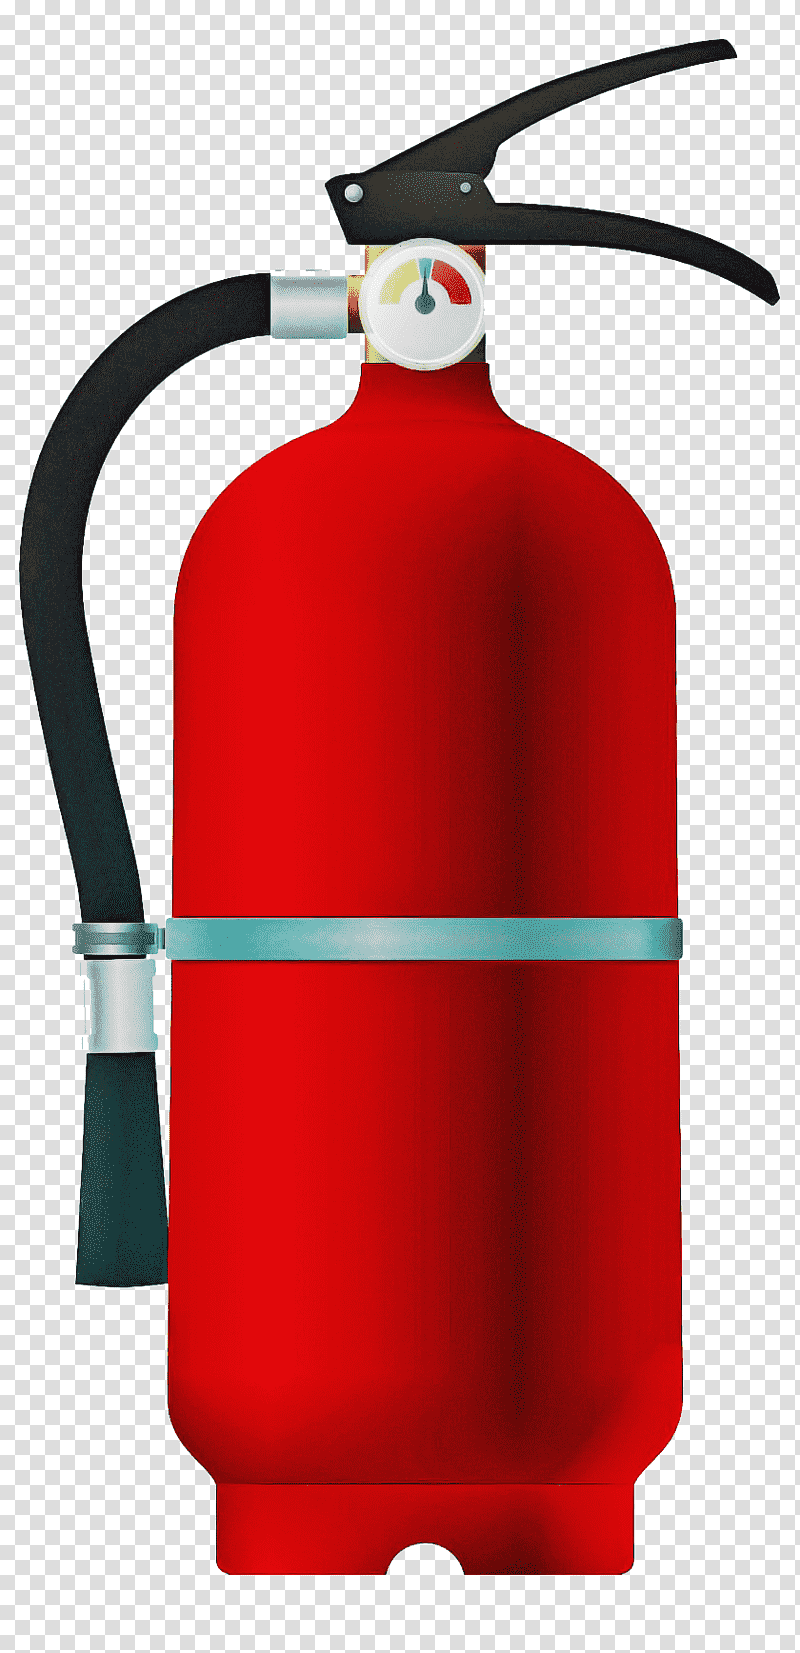 Fire Extinguisher, Flame, Firefighting, Smoke Detector, Combustion, Bromochlorodifluoromethane, Safety transparent background PNG clipart